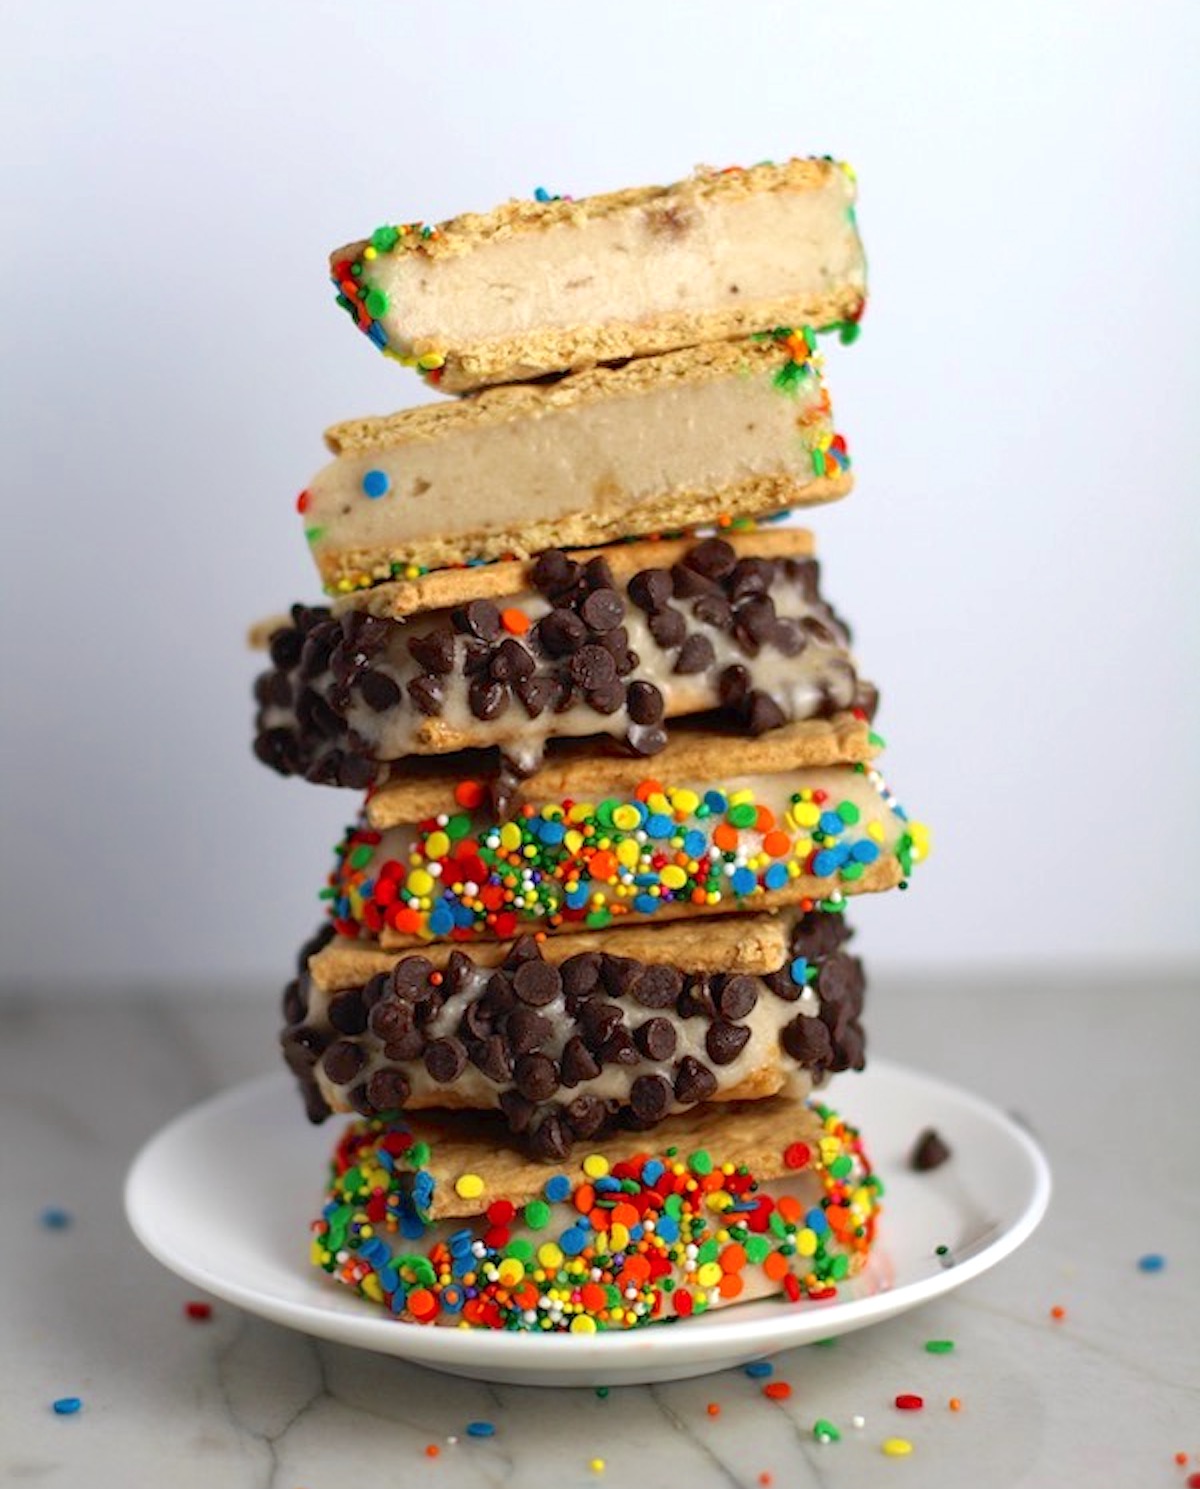 Banana almond milk  Ice Cream Sandwiches with Sprinkles and chocolate chips stacked on top of each other.